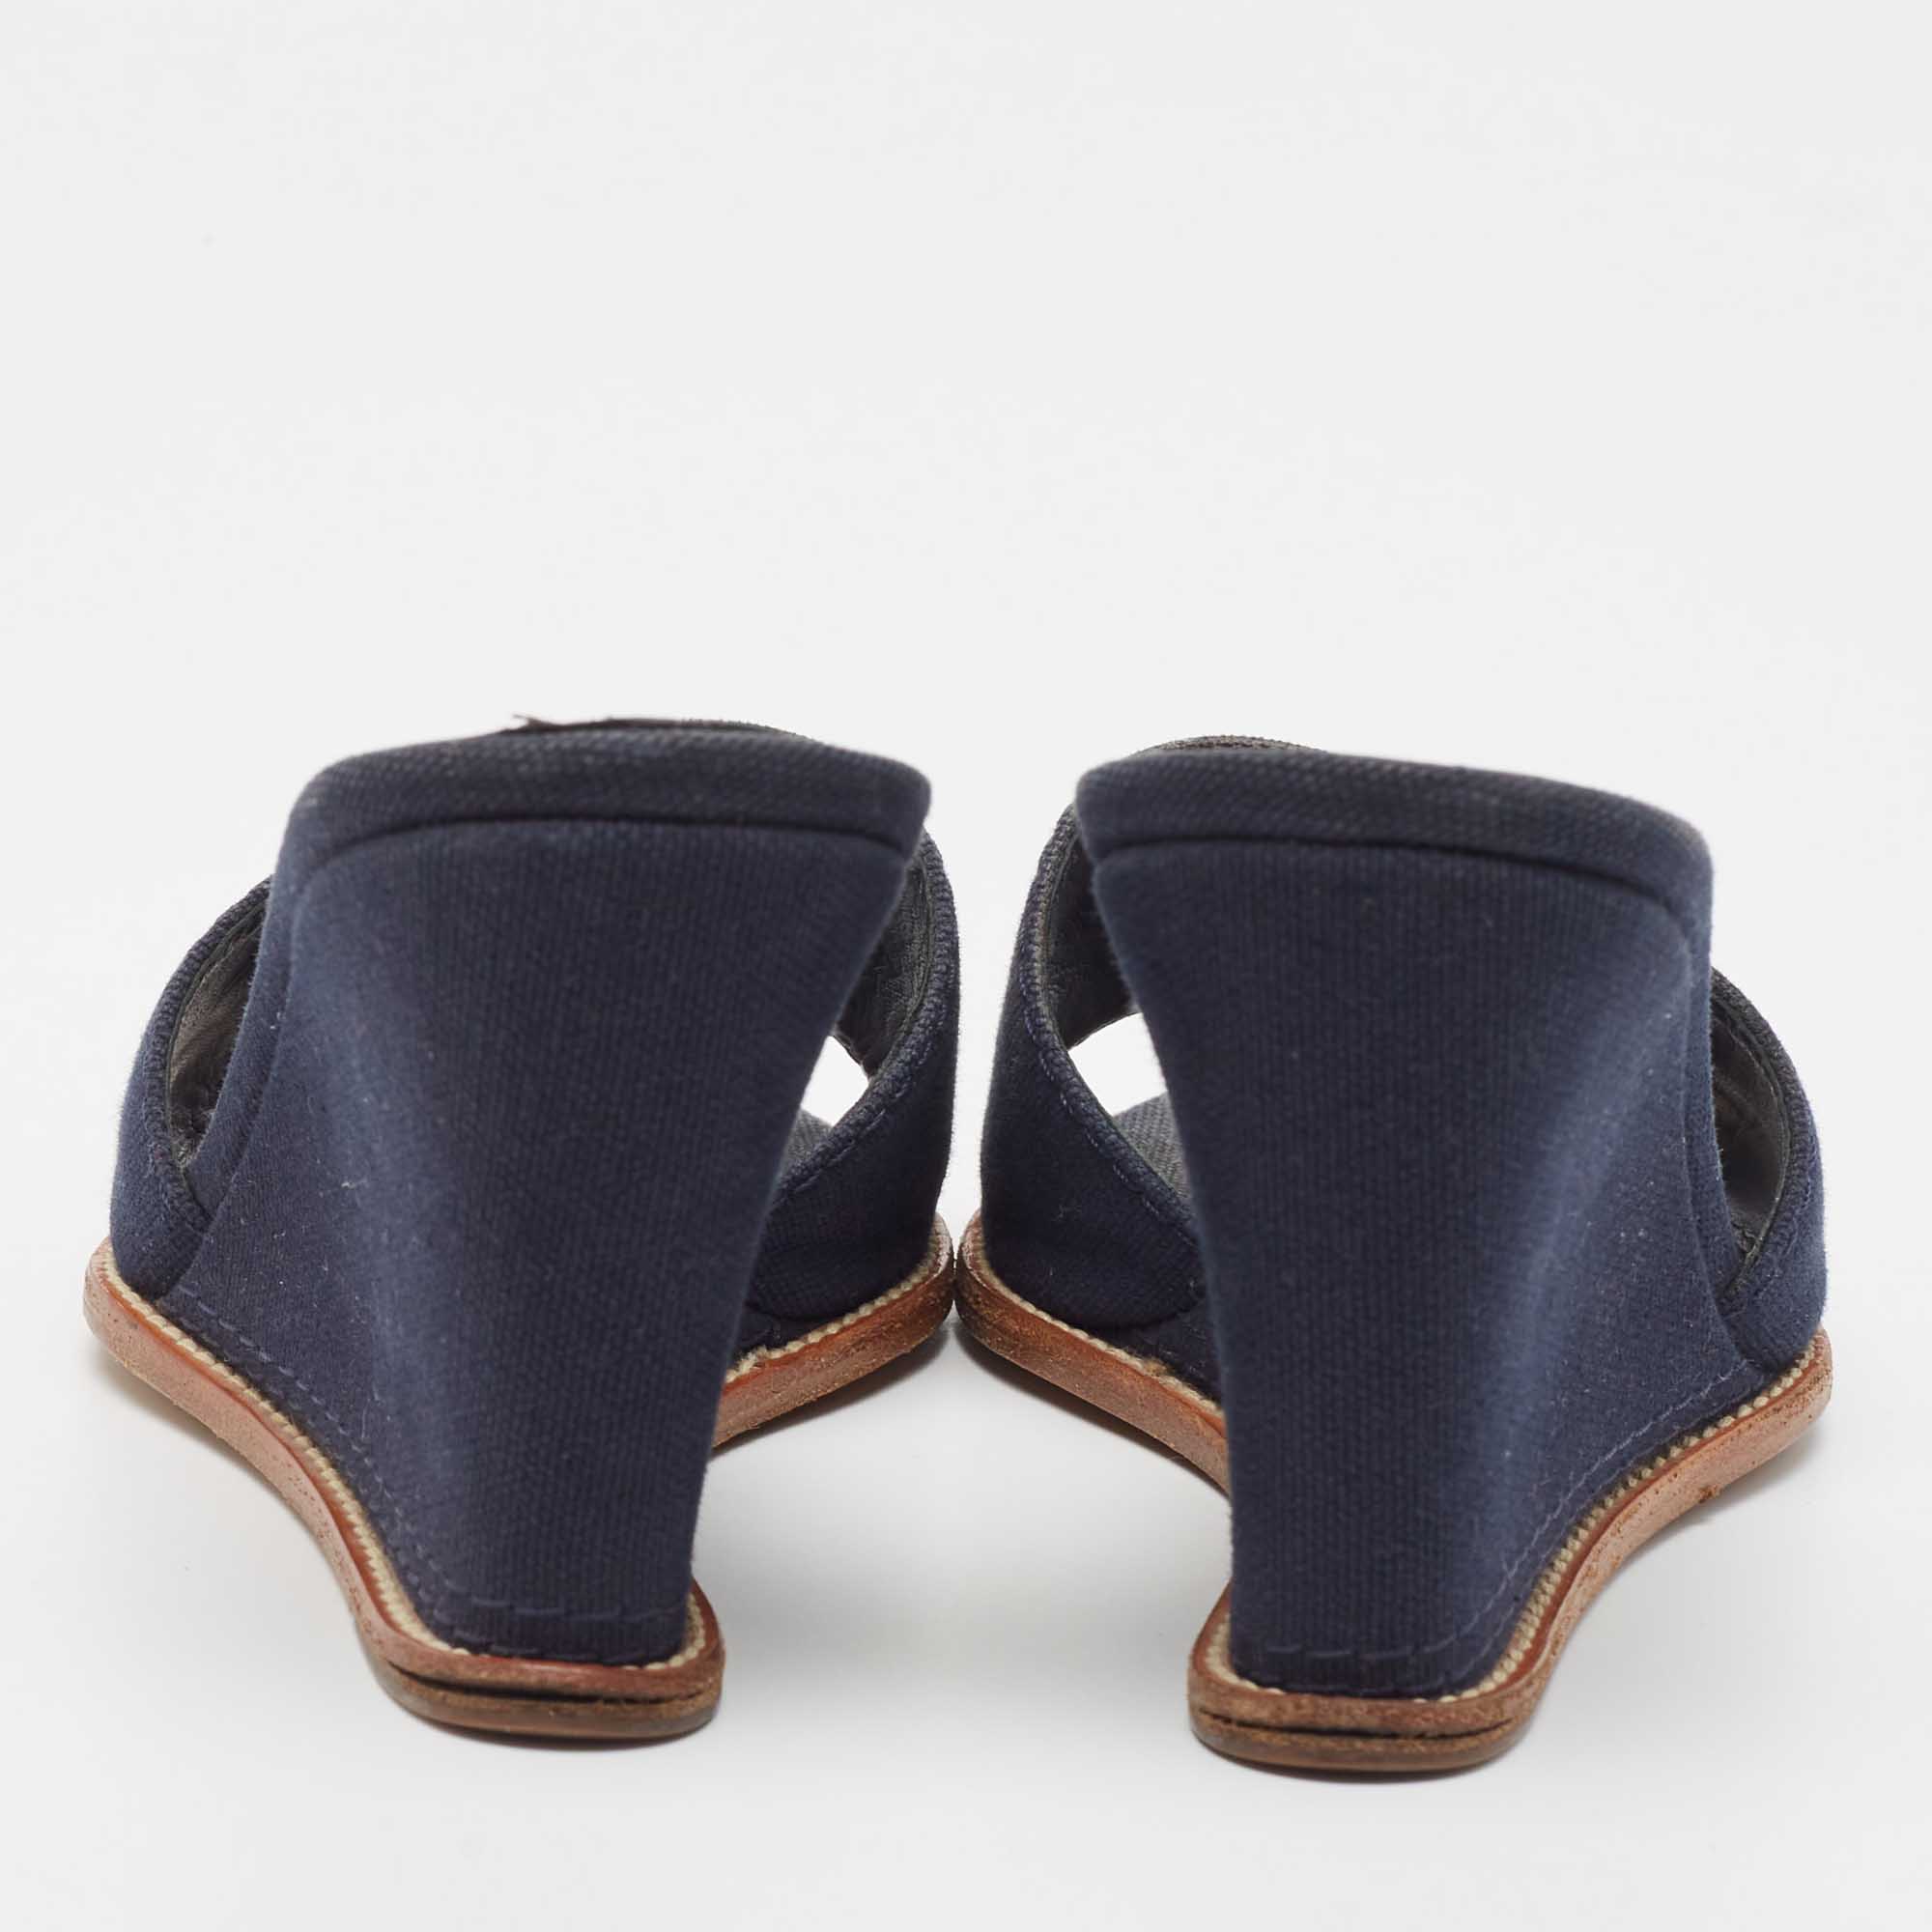 Chanel Navy Blue Canvas CC Wedge Slide Size 37.5